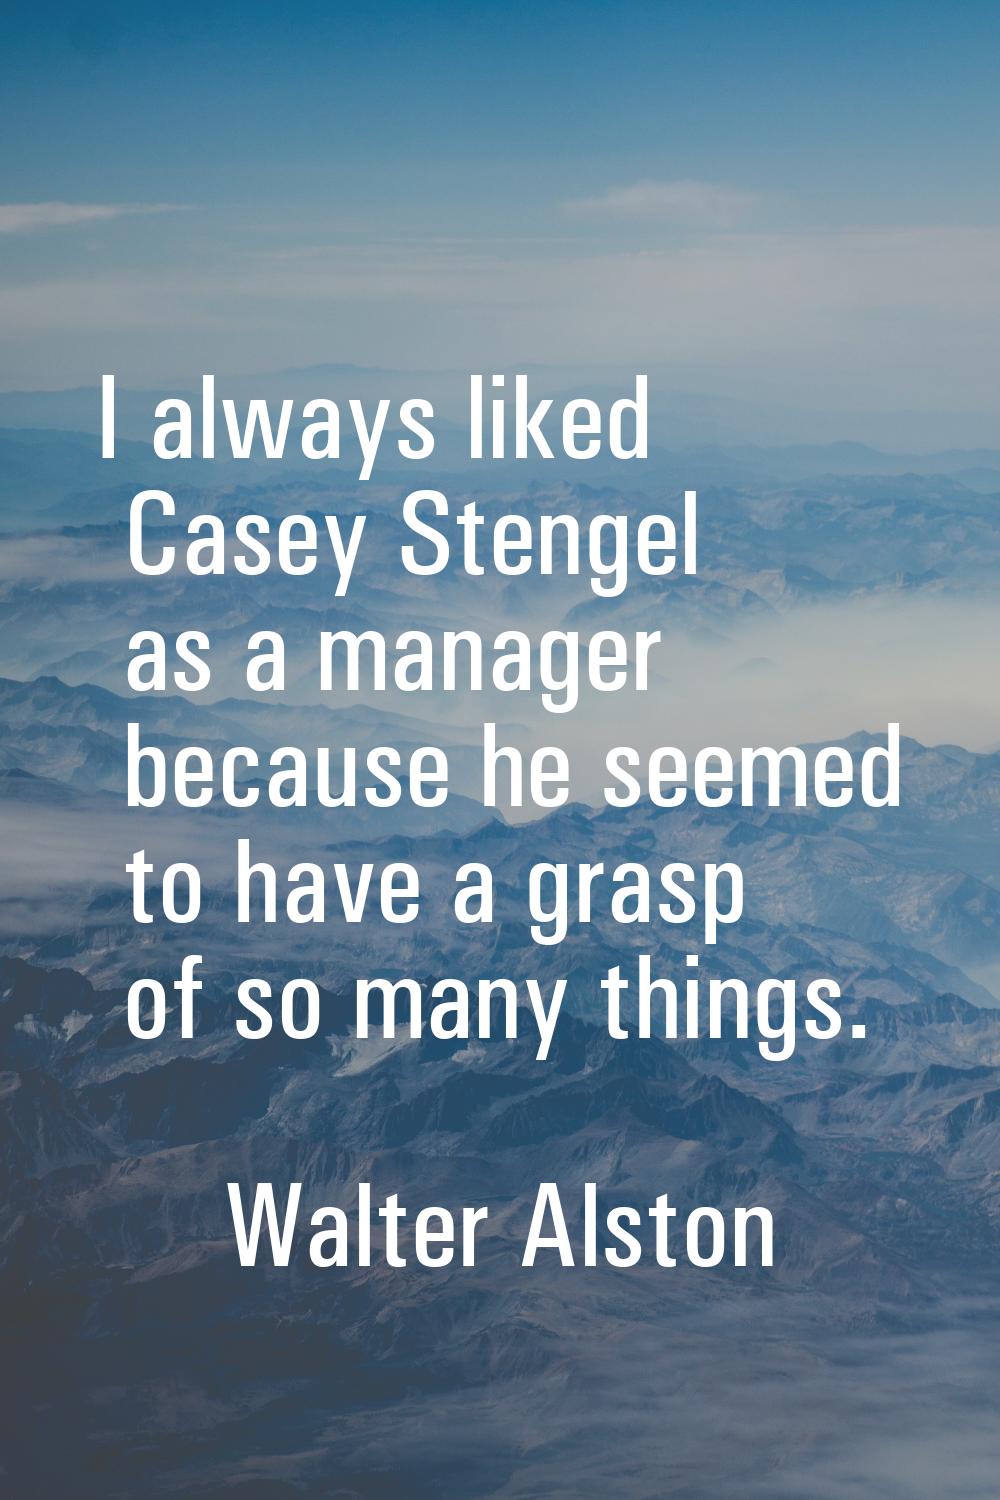 I always liked Casey Stengel as a manager because he seemed to have a grasp of so many things.